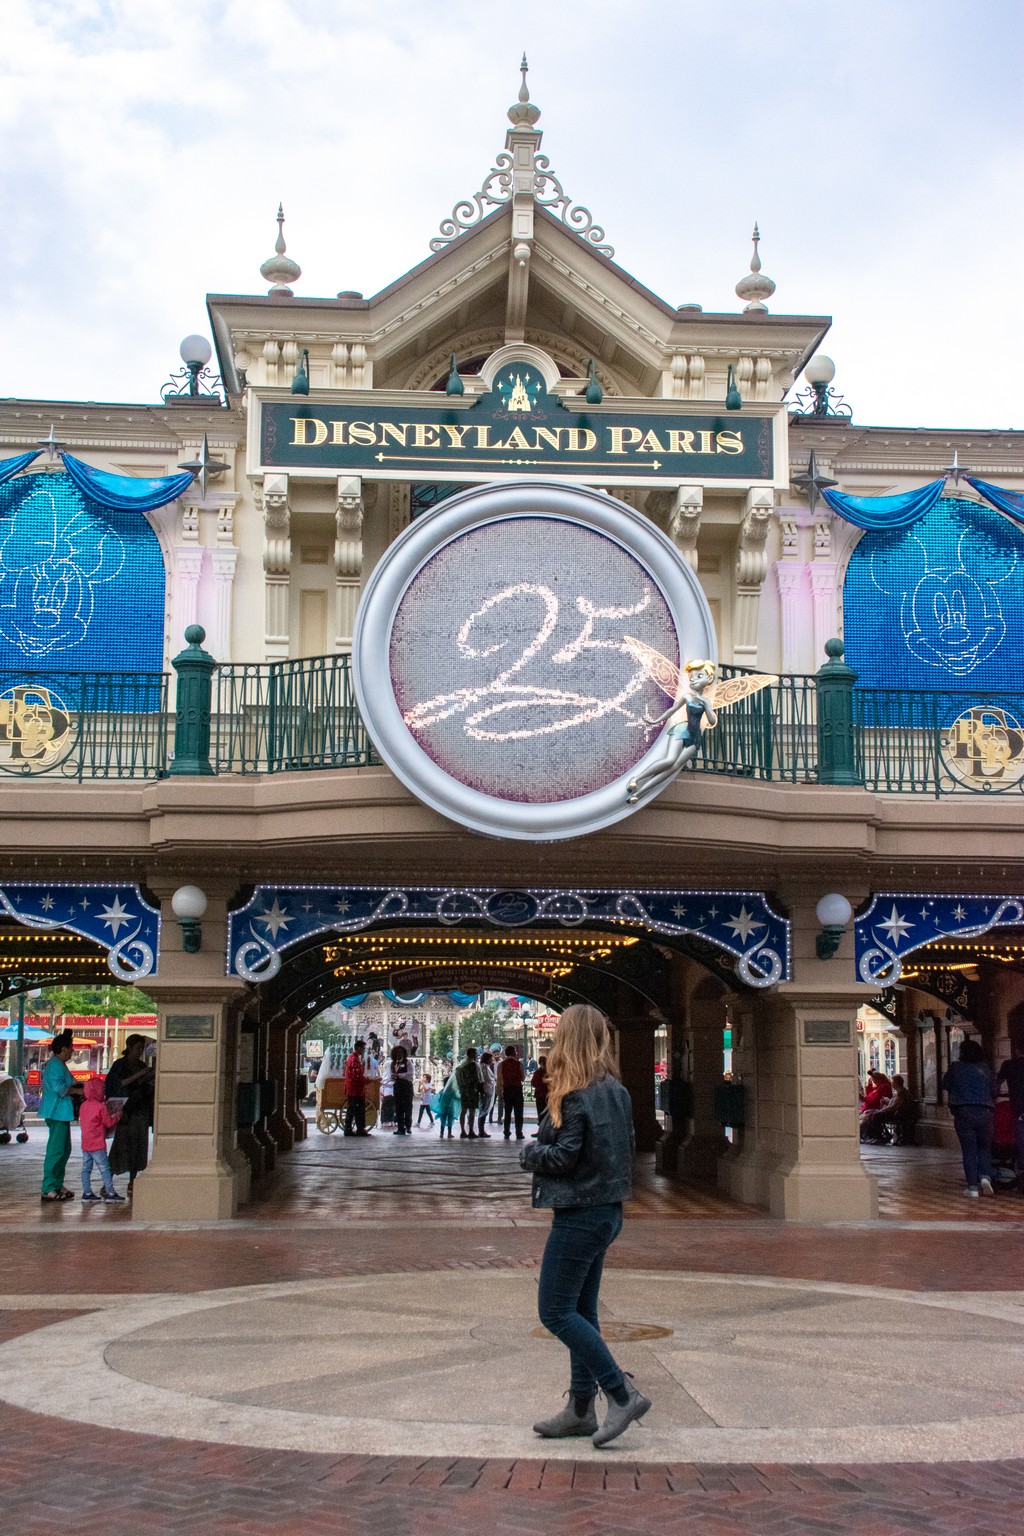 <img src="entrance.png" alt="a girl standing in front of the entrance to disneyland paris"> 